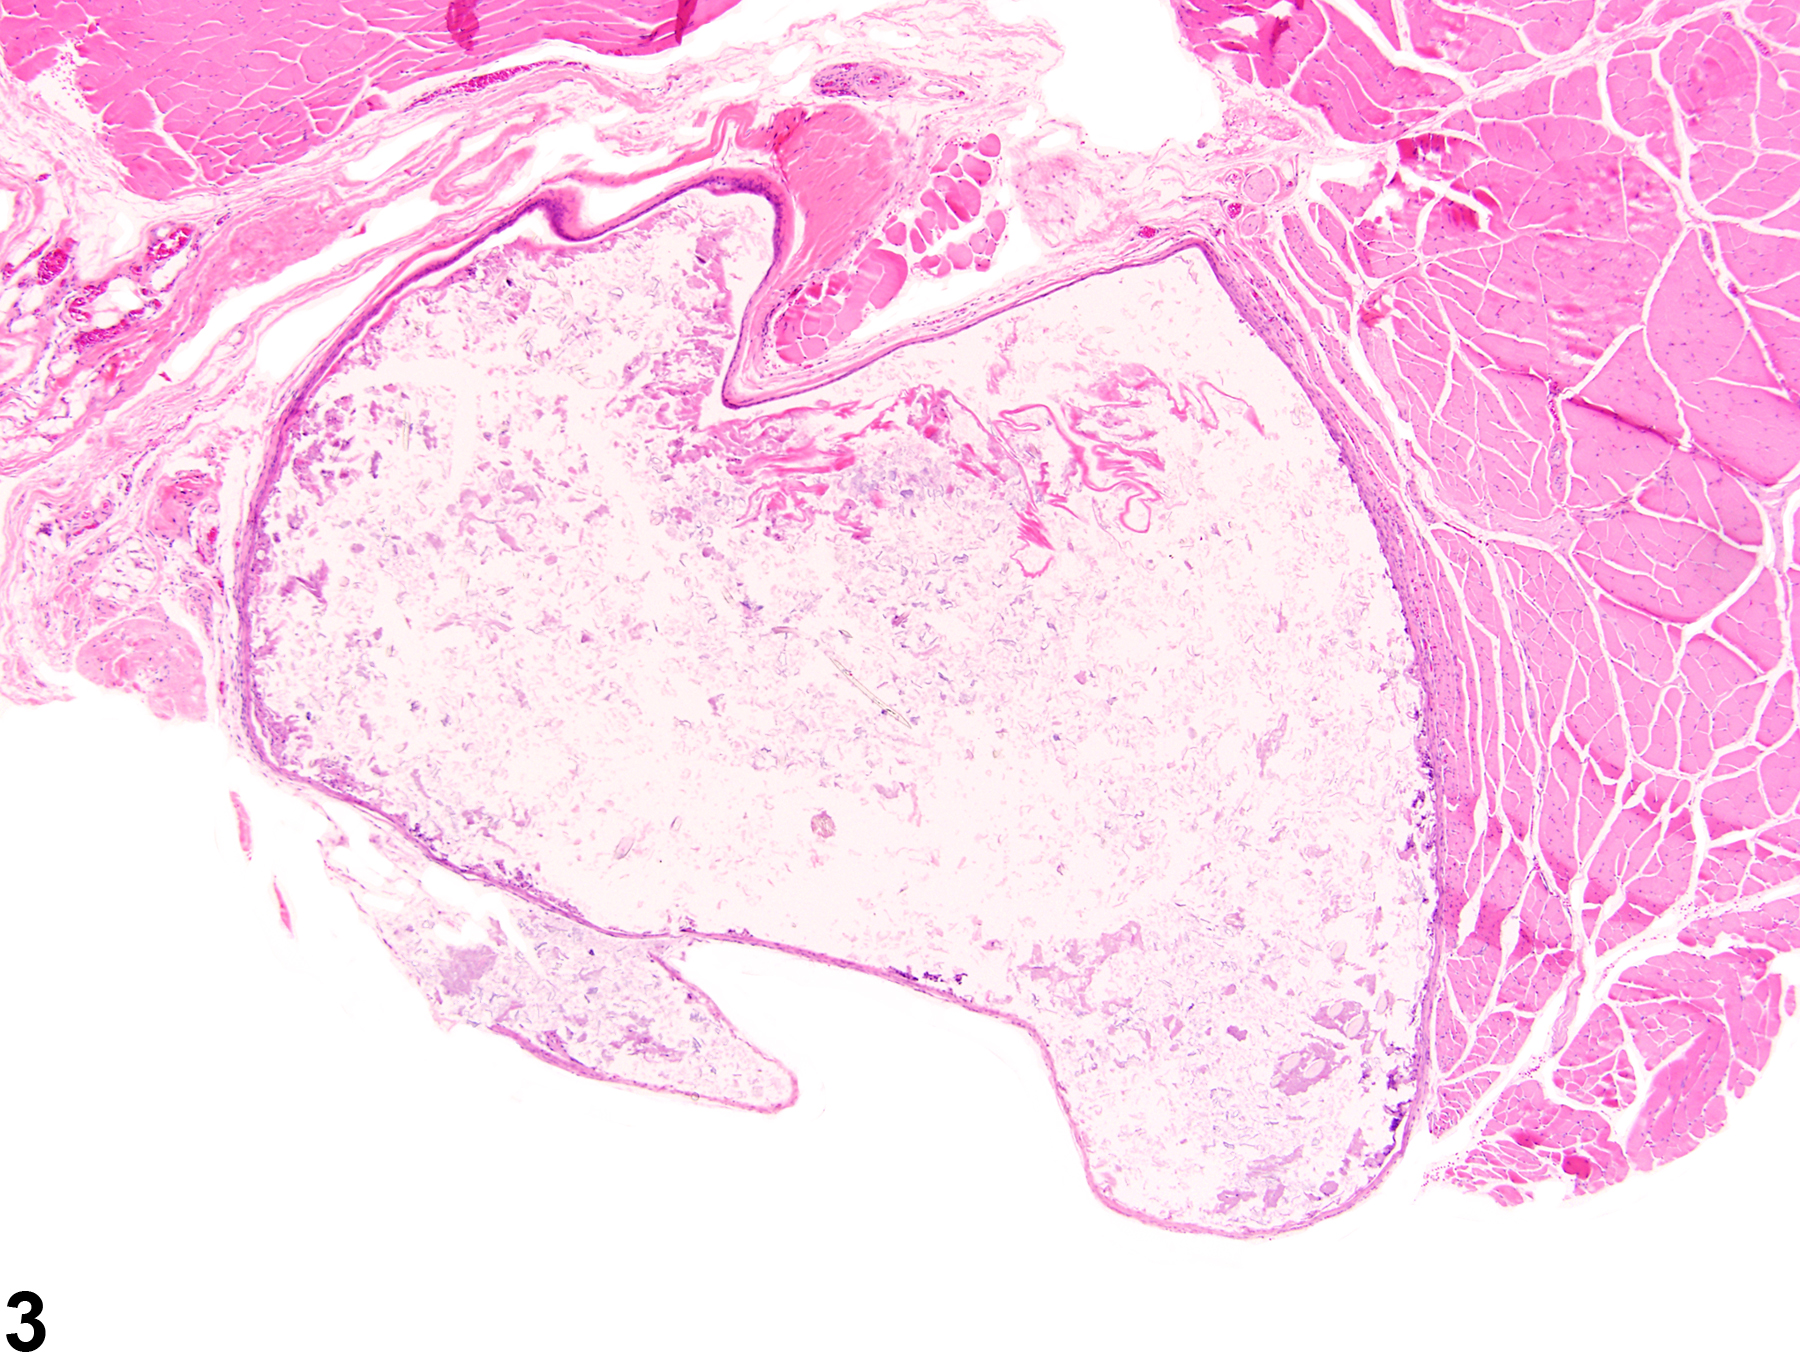 Image of cyst in the skeletal muscle from a female F344/N rat in a chronic study